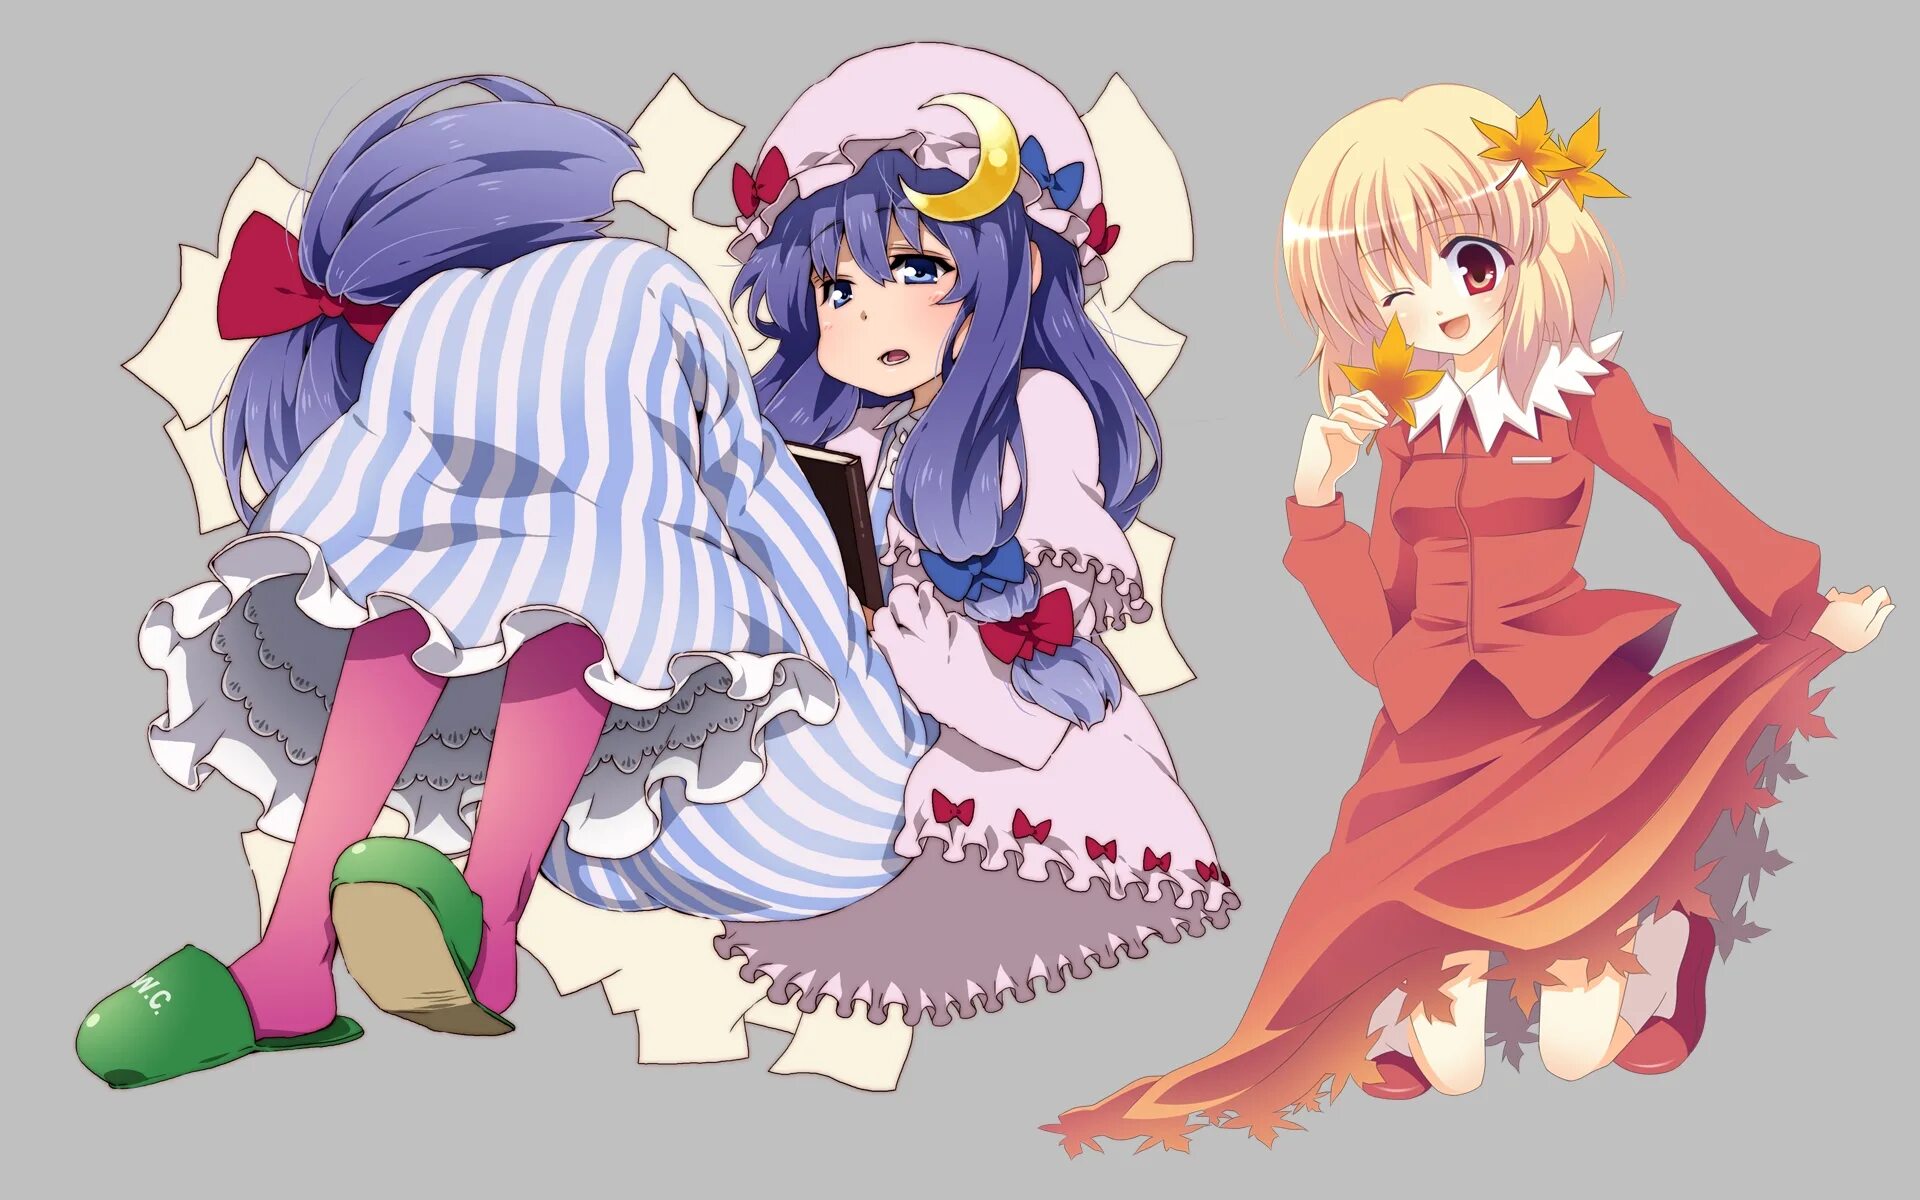 Touhou summer days dream. Touhou Summer Day's Dream. Touhou Dream. Touhou Summer Daydream. Юма т Тохо.